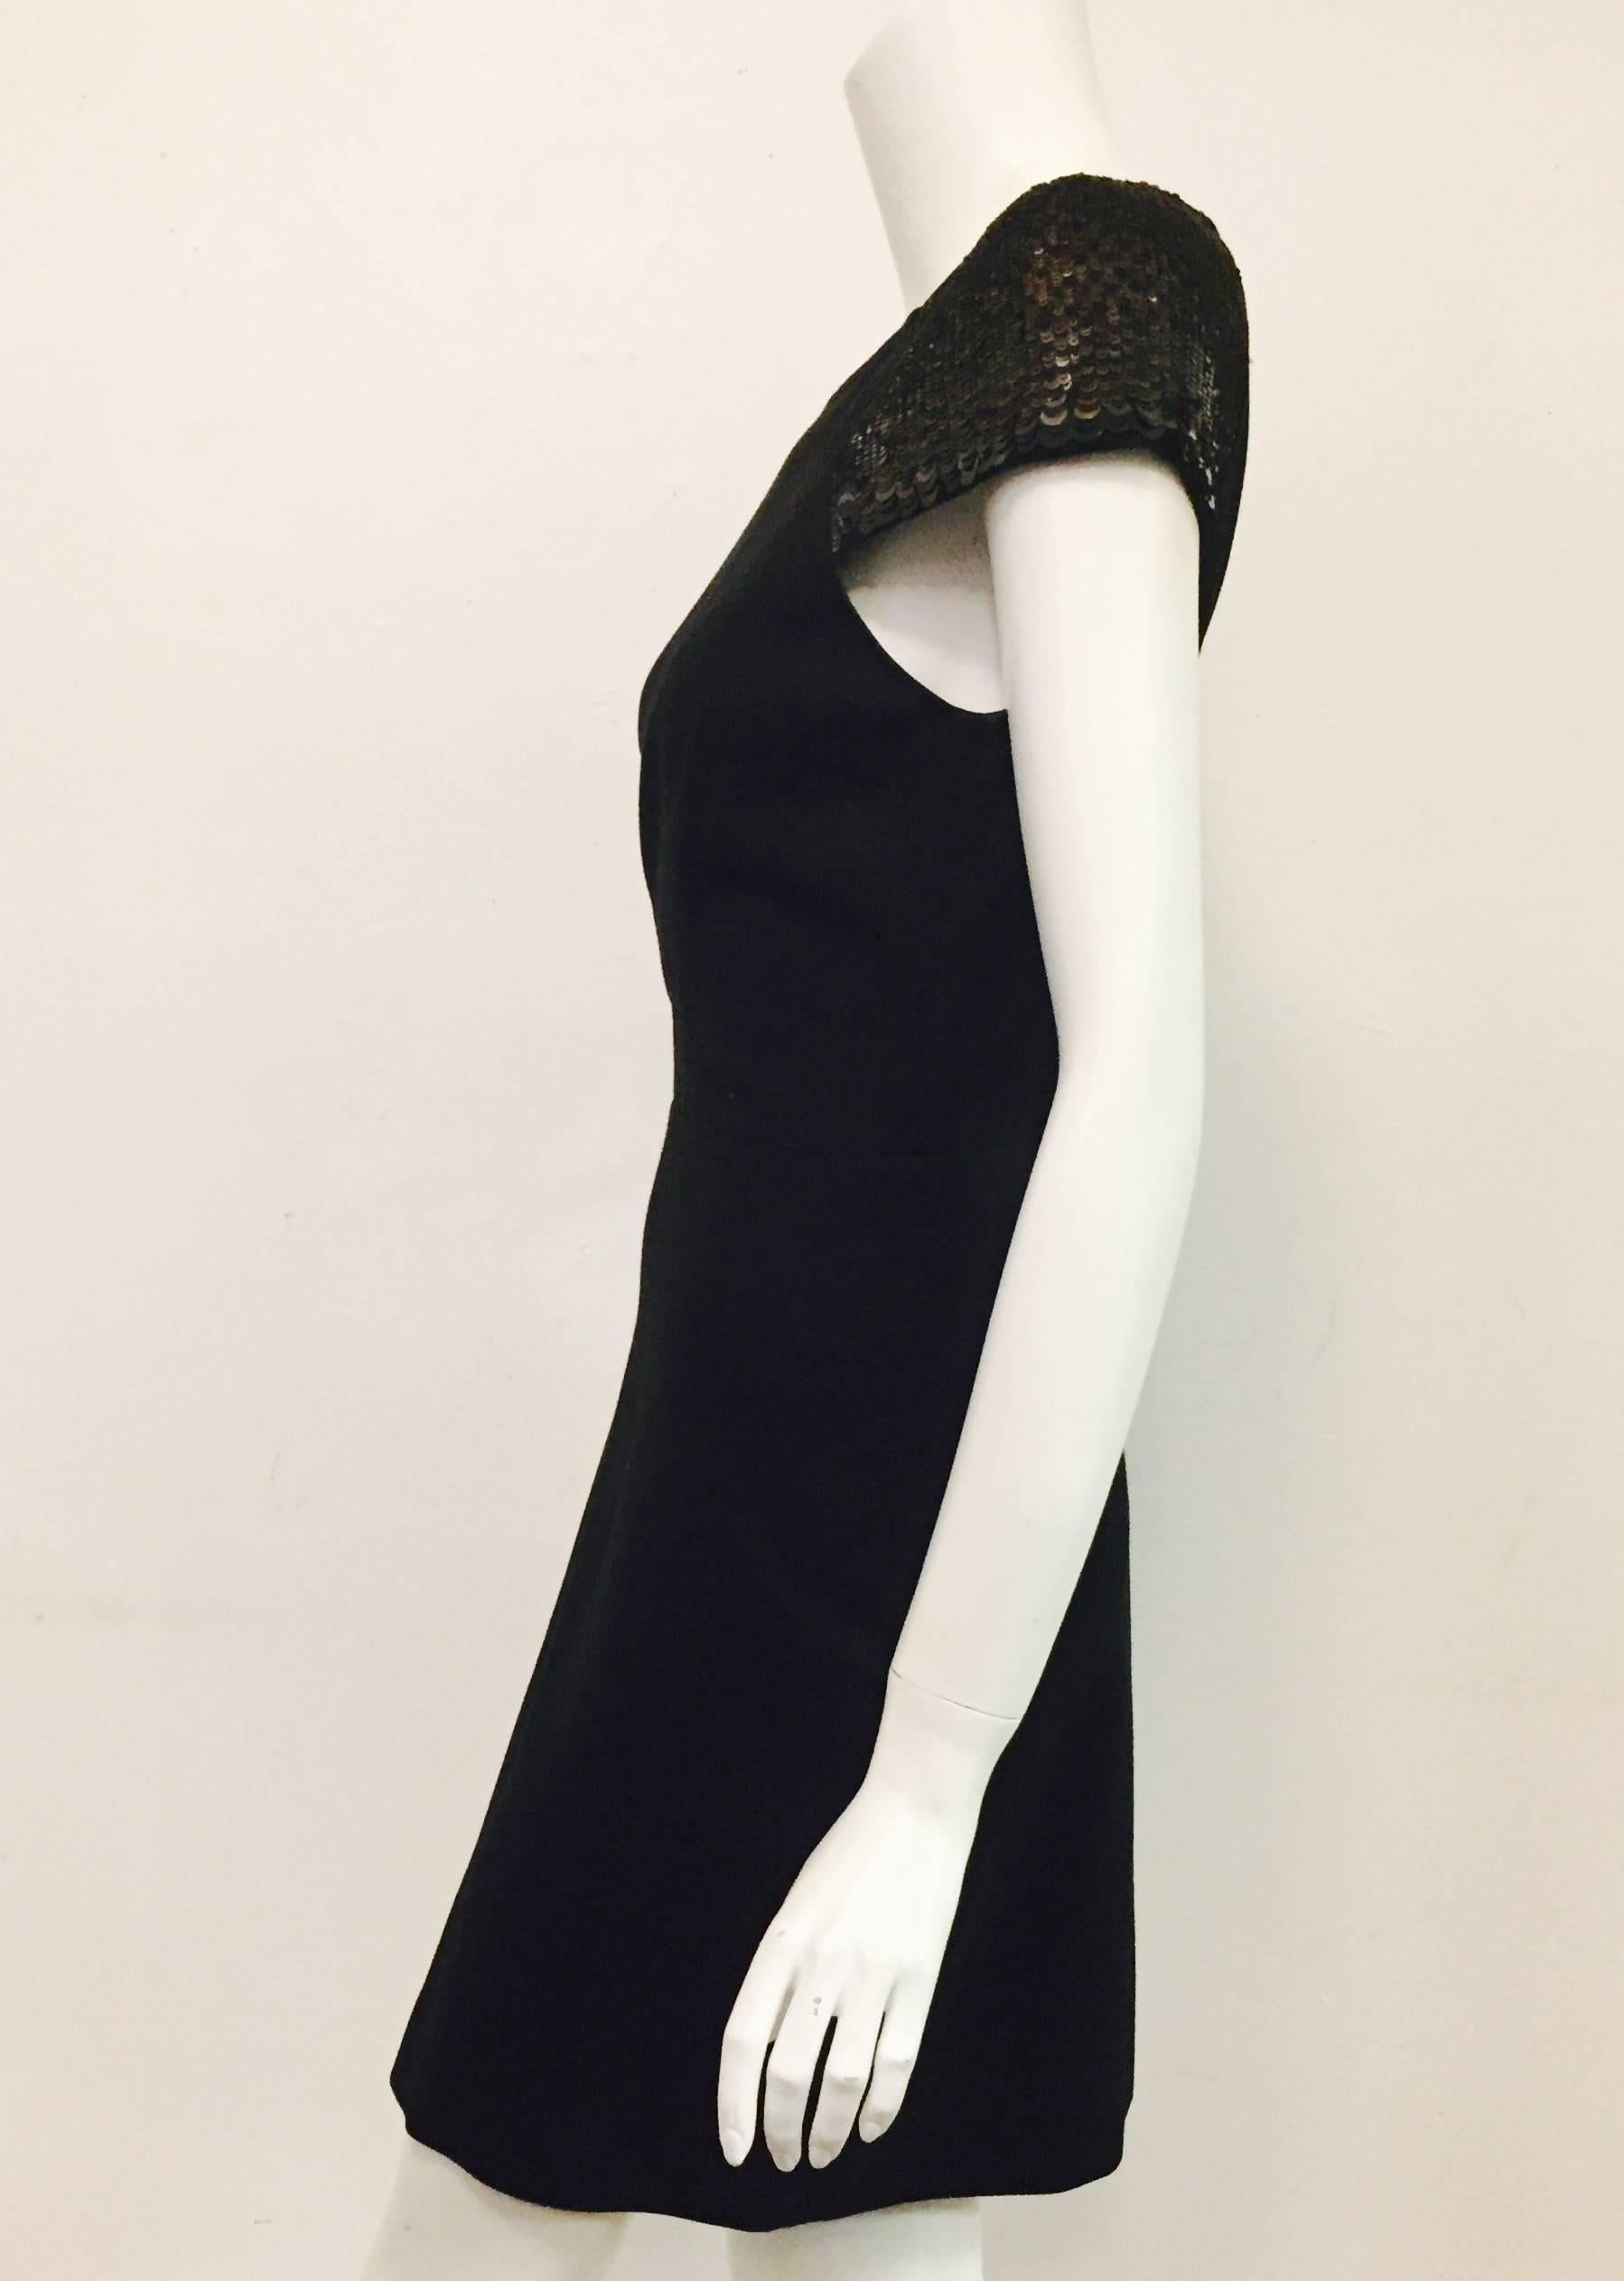 Women's Wonderful Jason Wu Black Silk Dress with Sequined Cap Sleeves For Sale